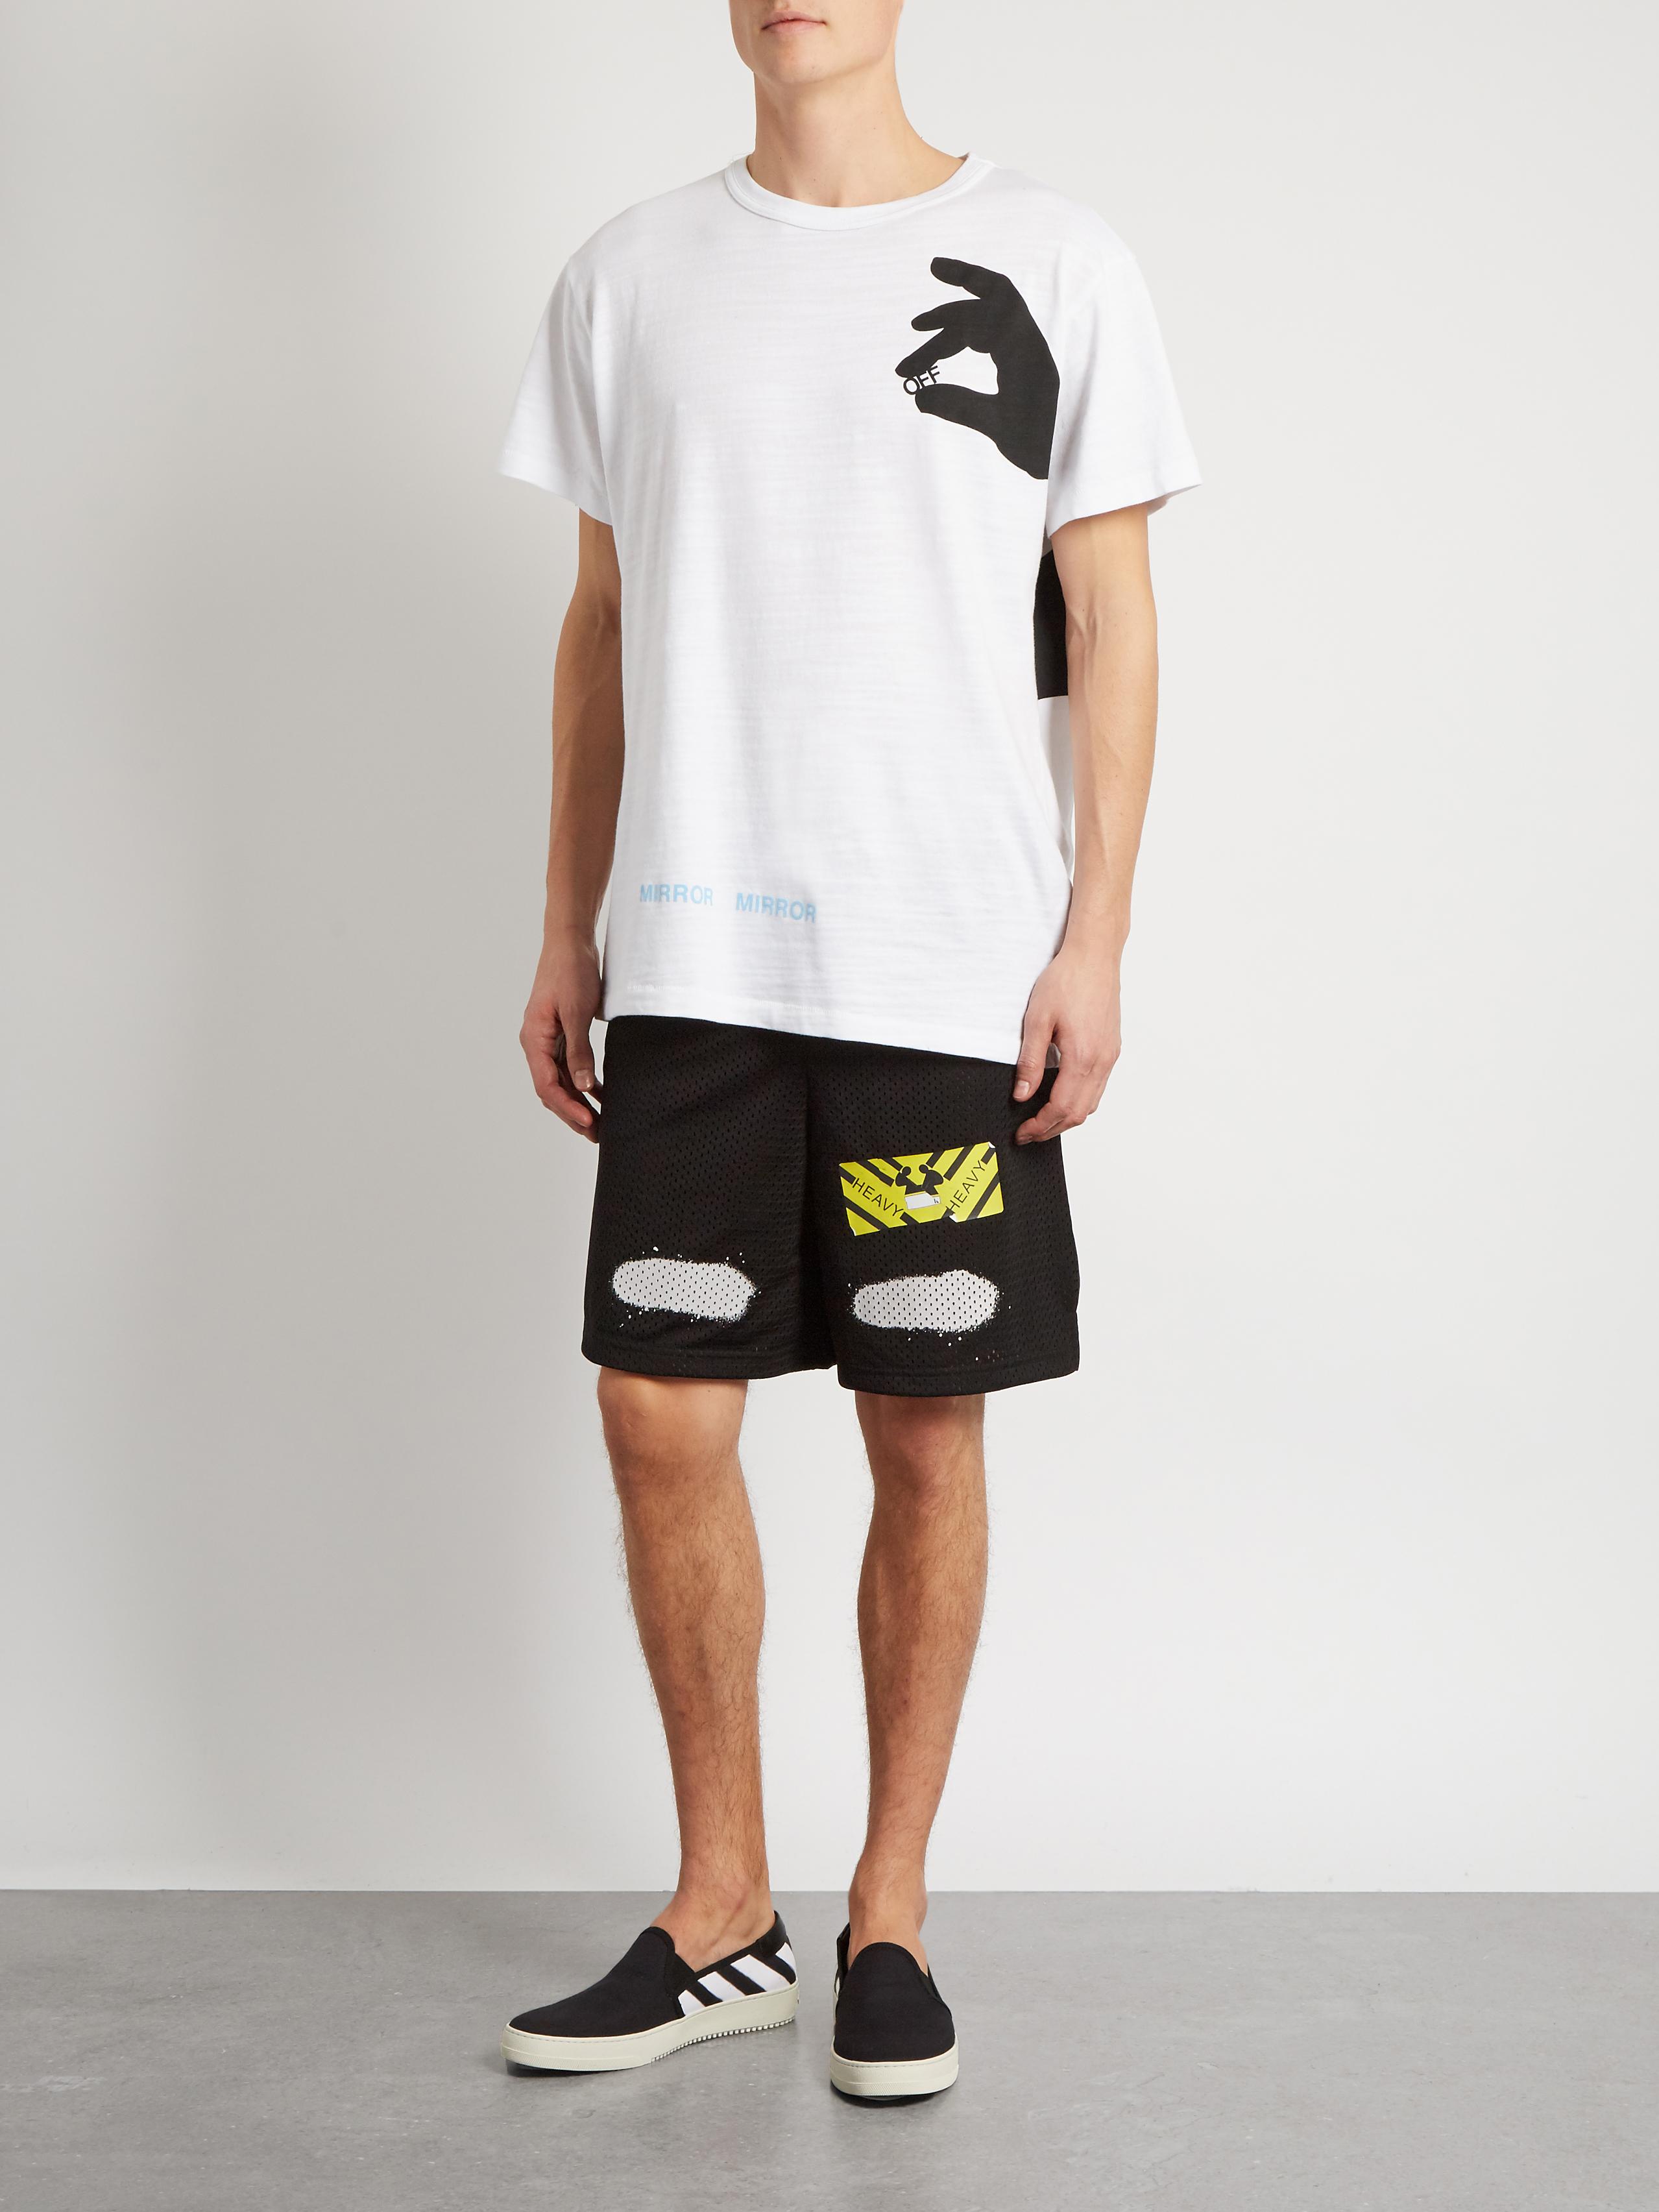 Off-White c/o Virgil Abloh Synthetic Spray-paint Shorts in Black for Men - Lyst